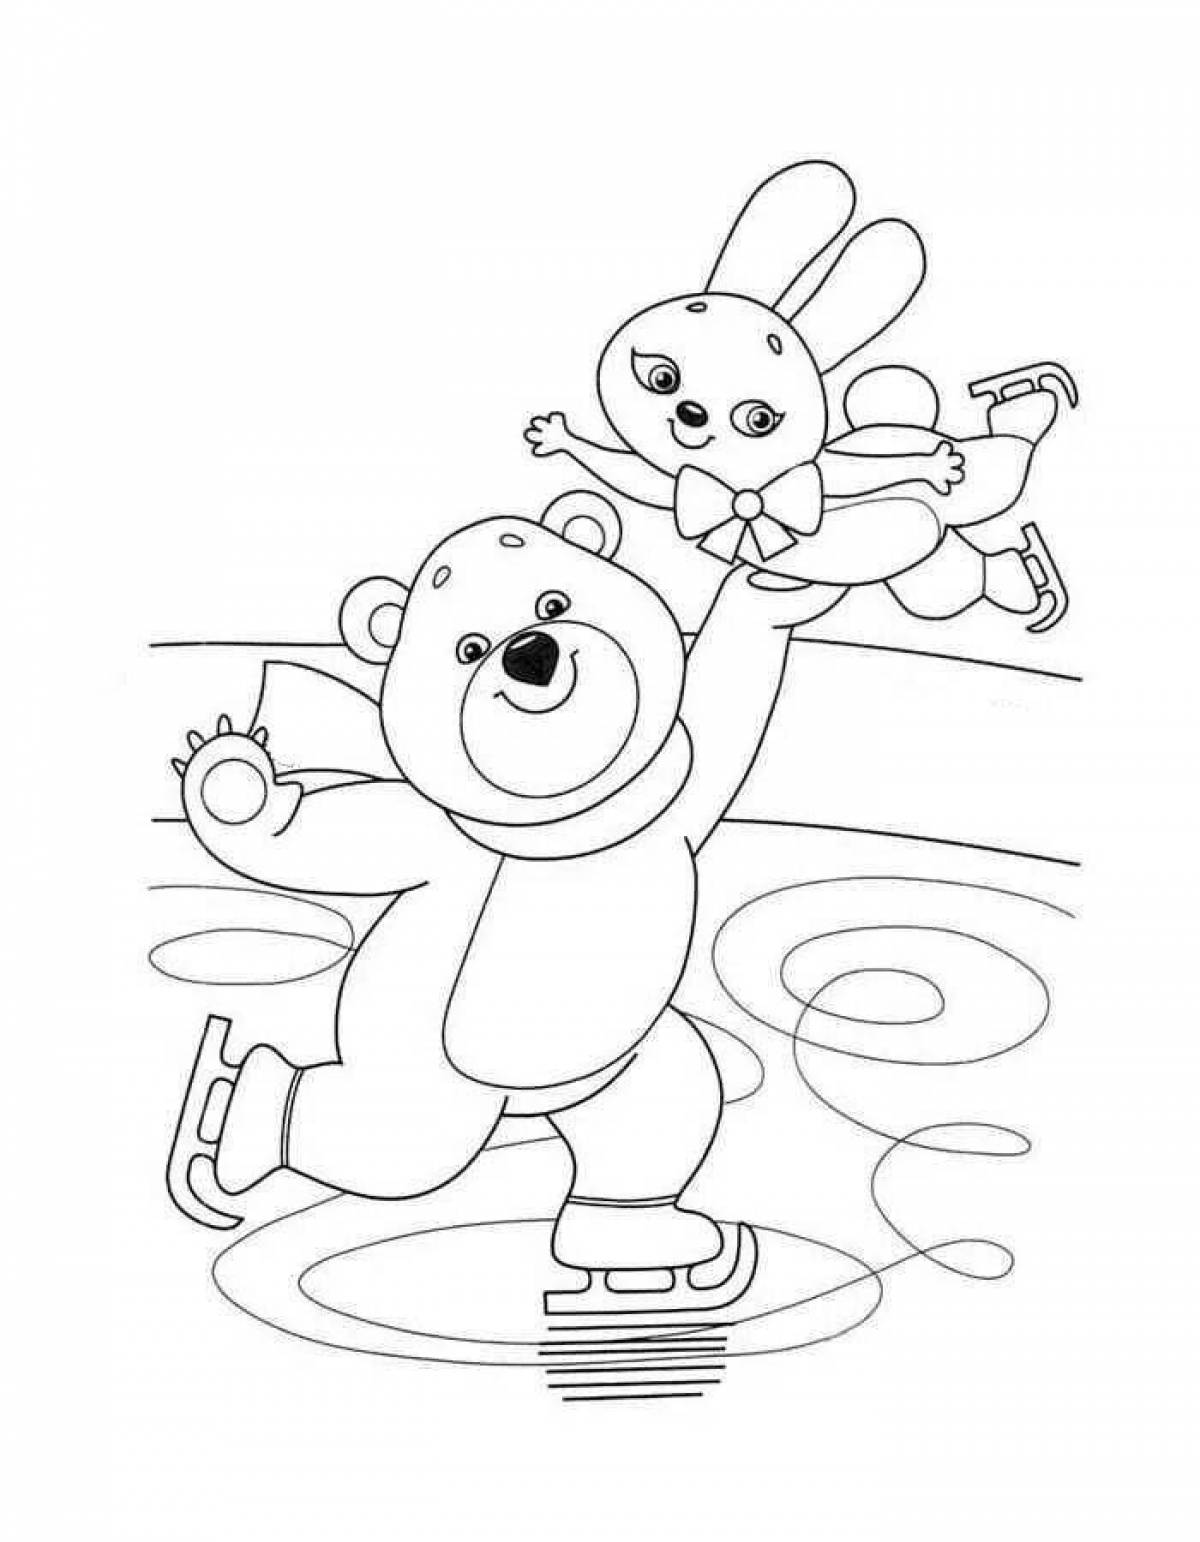 Rampant Olympic winter sports coloring page